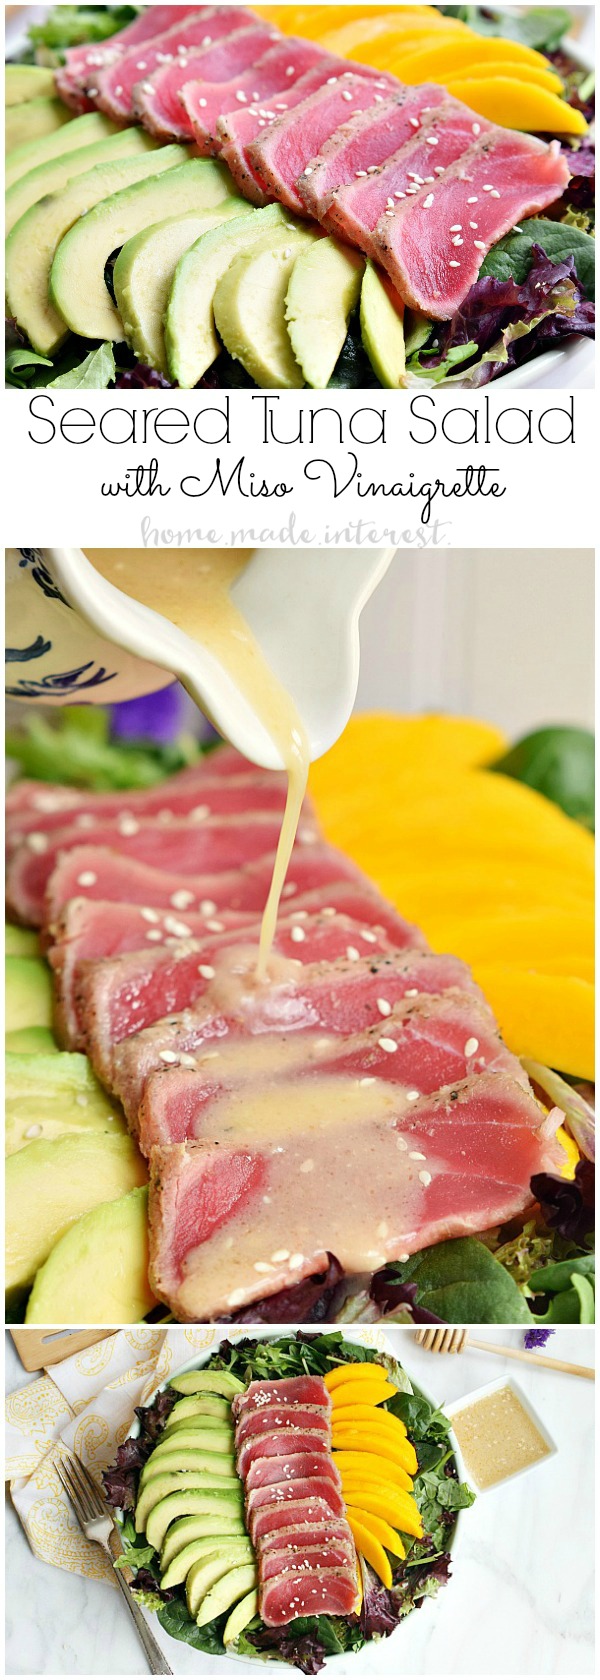 This light and fresh seared tuna salad is a healthy lunch option mixed with mangoes and avocados and topped with a Miso vinaigrette. 